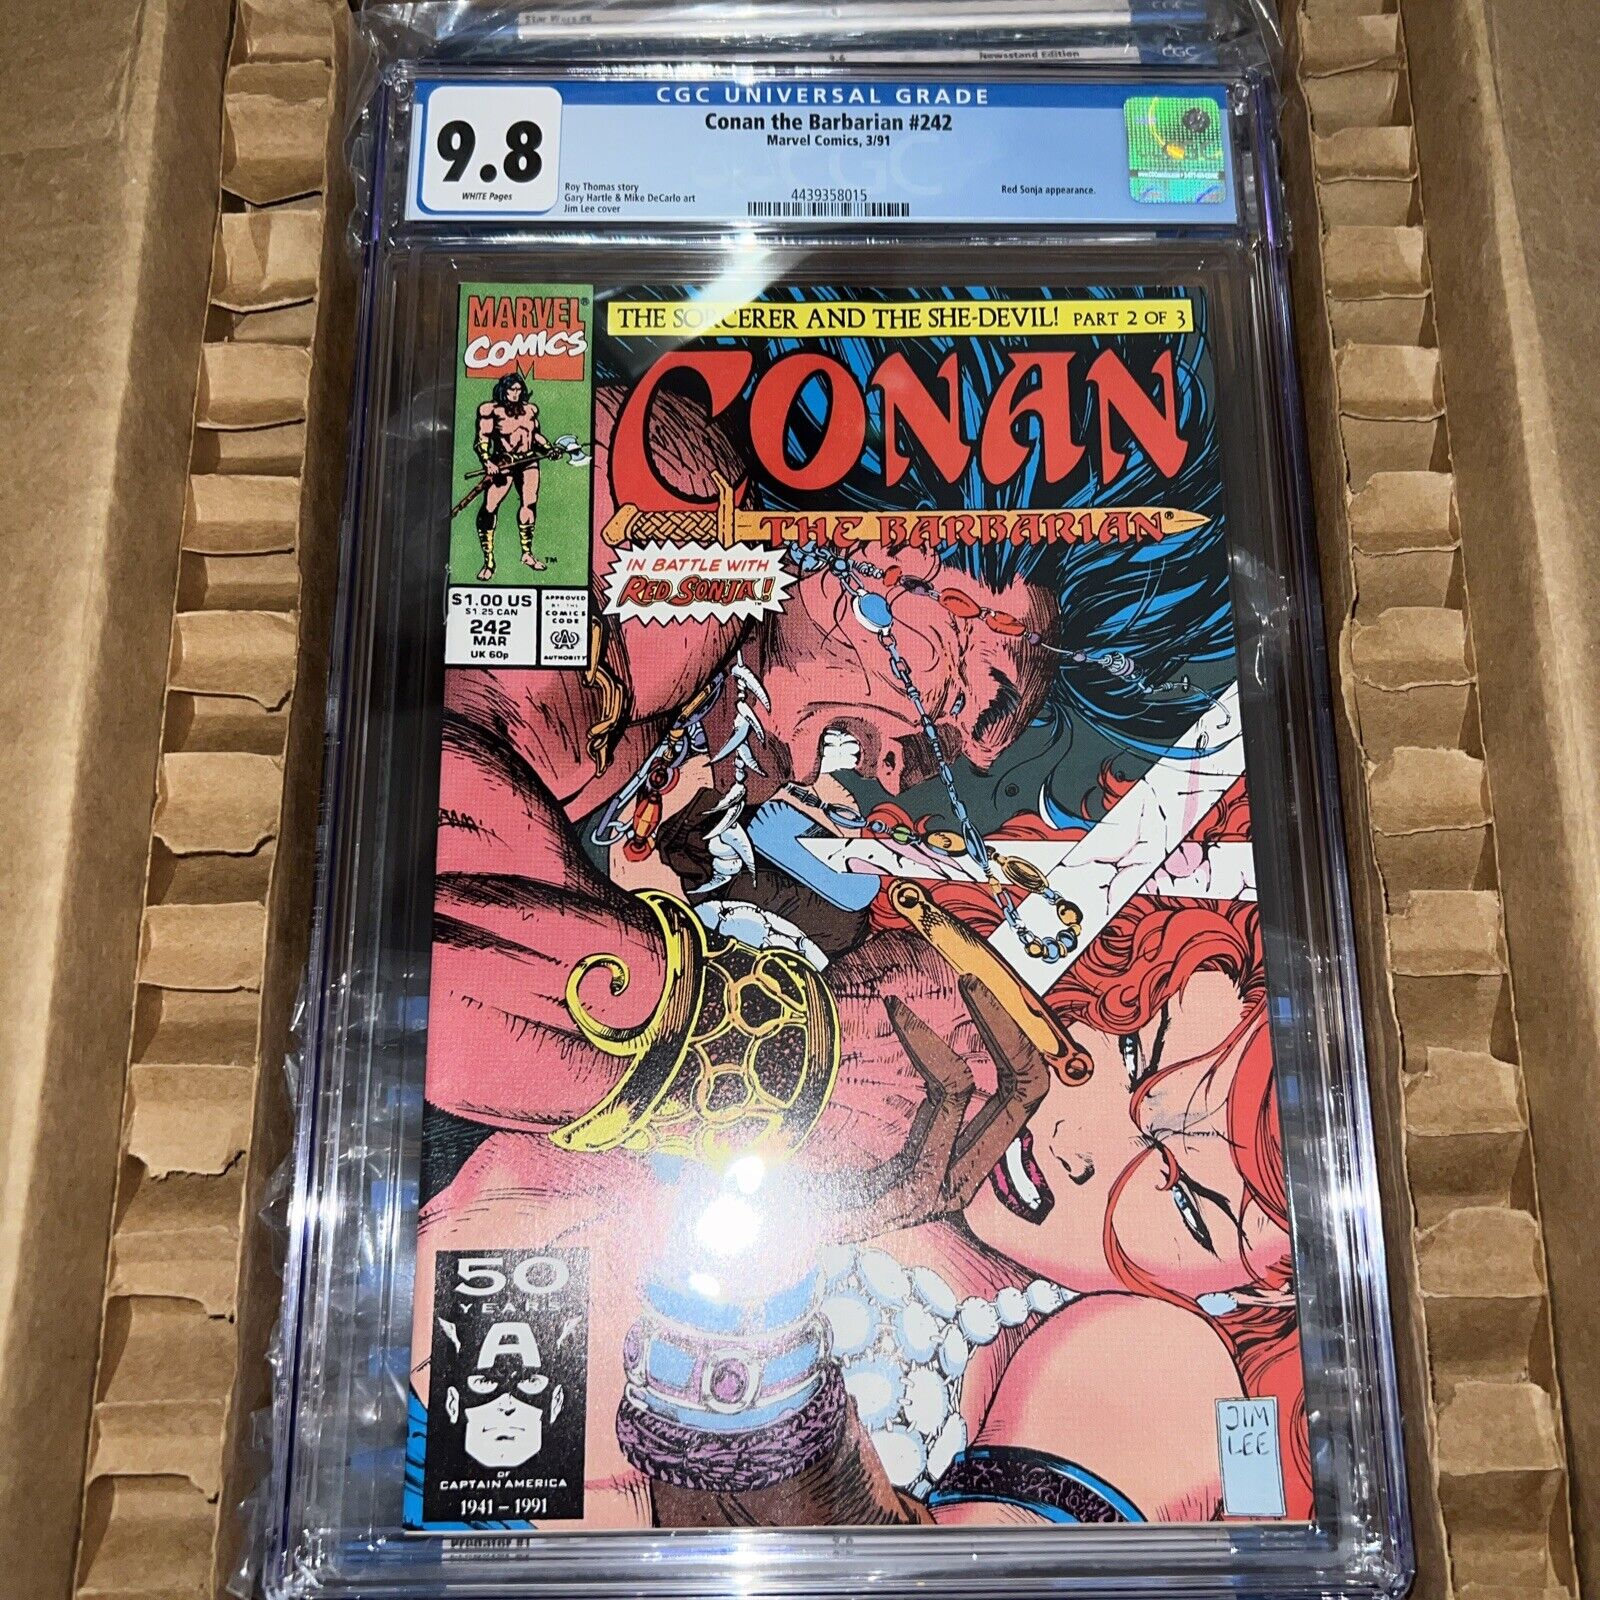 Conan The Barbarian #242  (1991) - Red Sonya - Jim Lee - CGC 9.8 - White Pages